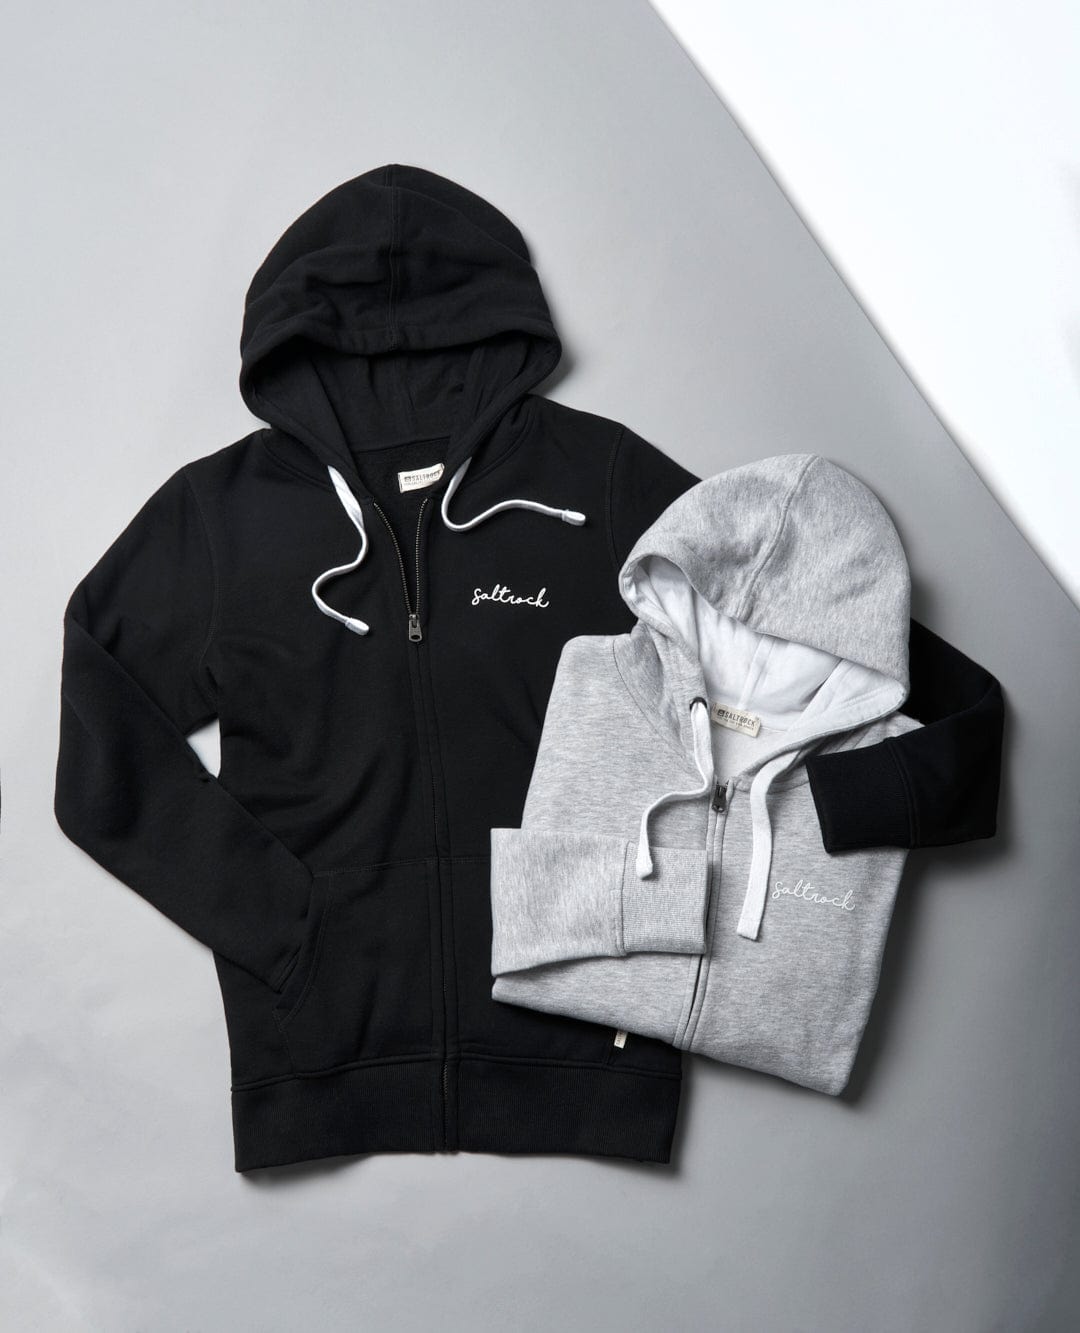 A black and grey Velator - Womens Zip Hoodie - Grey and a white hoodie with Saltrock branding make for staple wardrobe essentials.